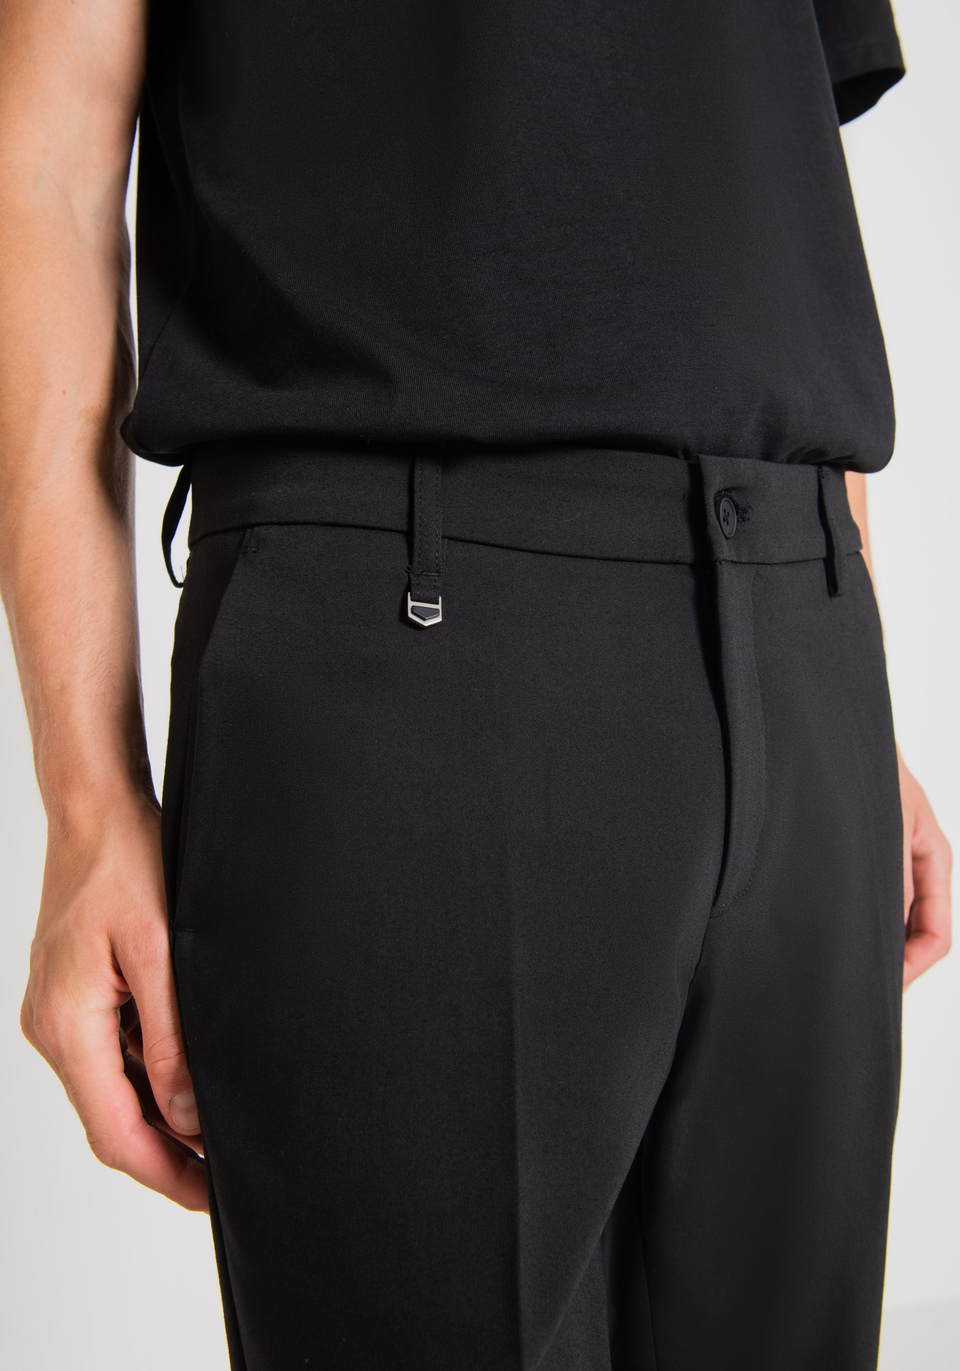 "THOM" SKINNY FIT TROUSERS IN STRETCH COTTON BLEND WITH ZIP ON THE BOTTOM - Antony Morato Online Shop